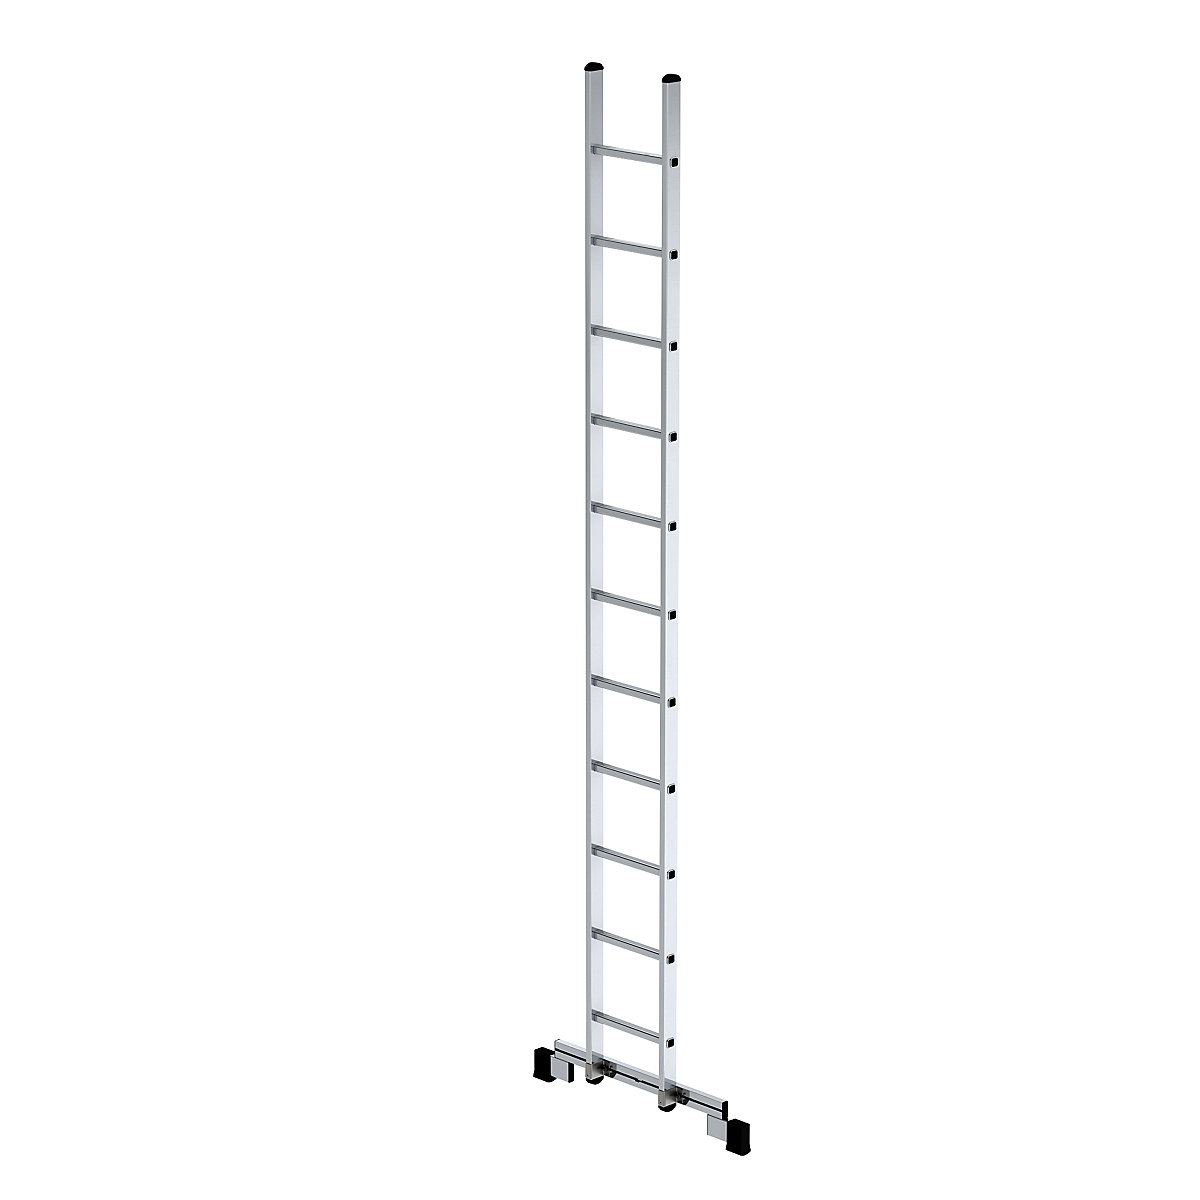 Lean to ladder with rungs - MUNK